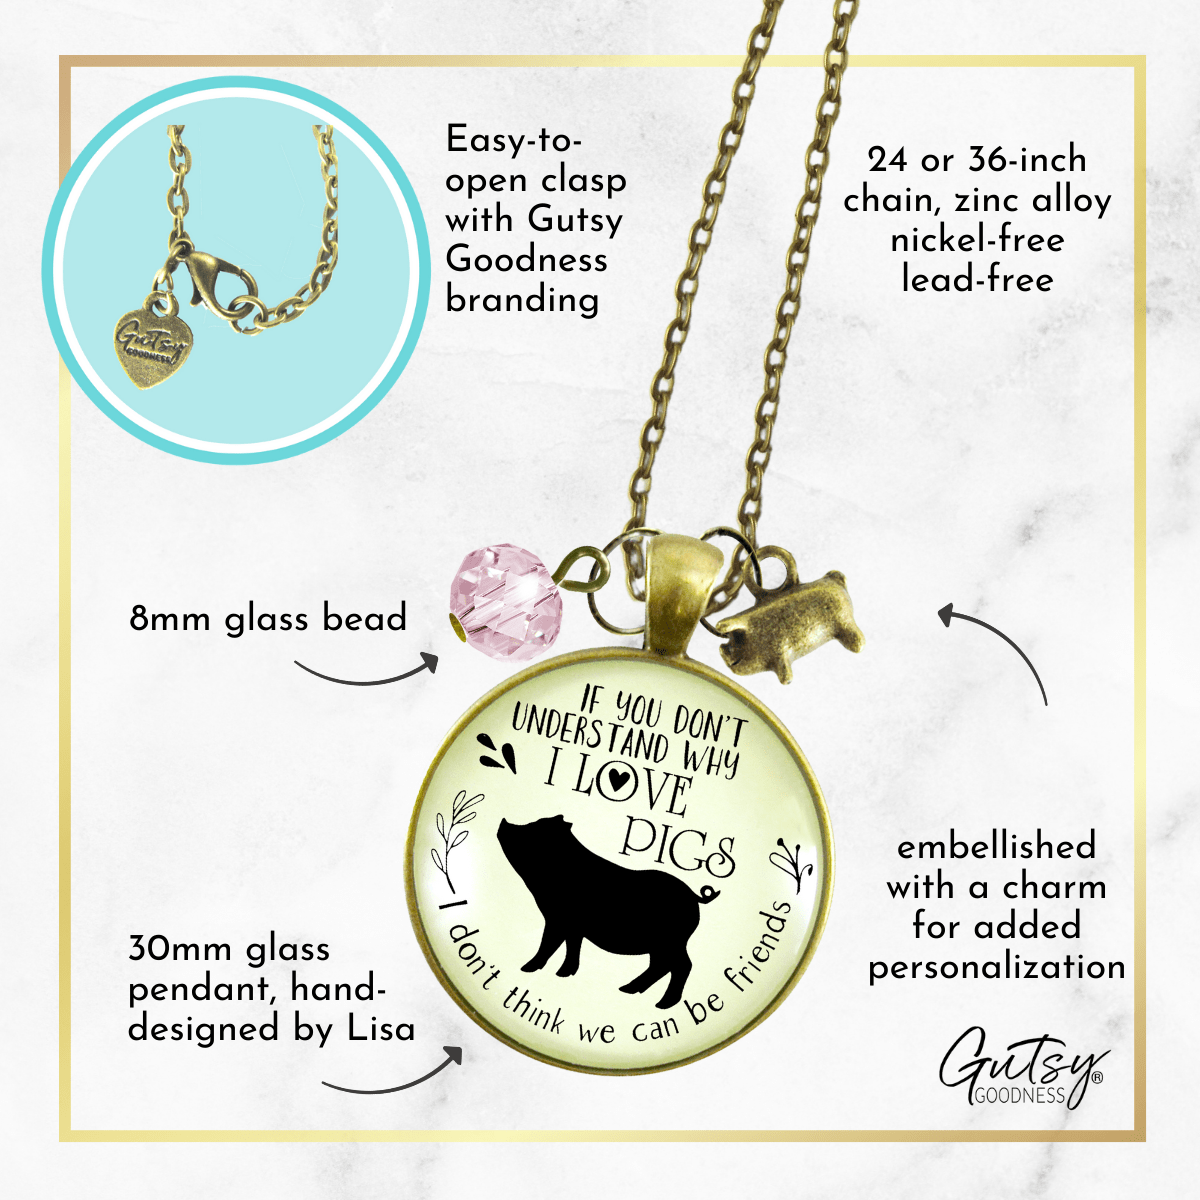 Gutsy Goodness Pig Friendship Necklace Country Girl Pig Lovers Inspired Jewelry - Gutsy Goodness;Pig Friendship Necklace Country Girl Pig Lovers Inspired Jewelry - Gutsy Goodness Handmade Jewelry Gifts